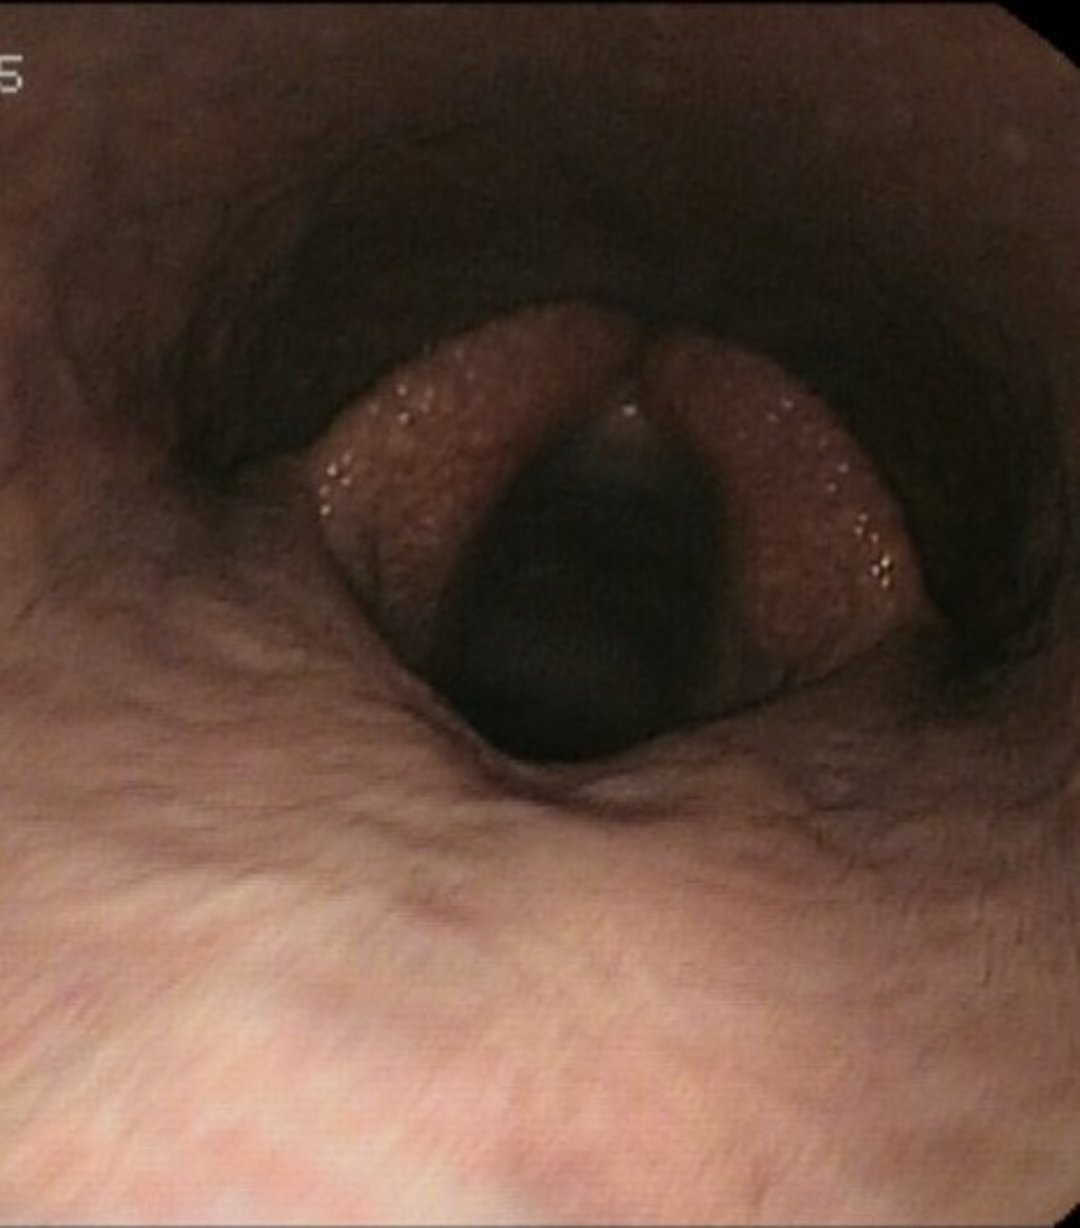 Dorsal displacement of the soft palate, horse